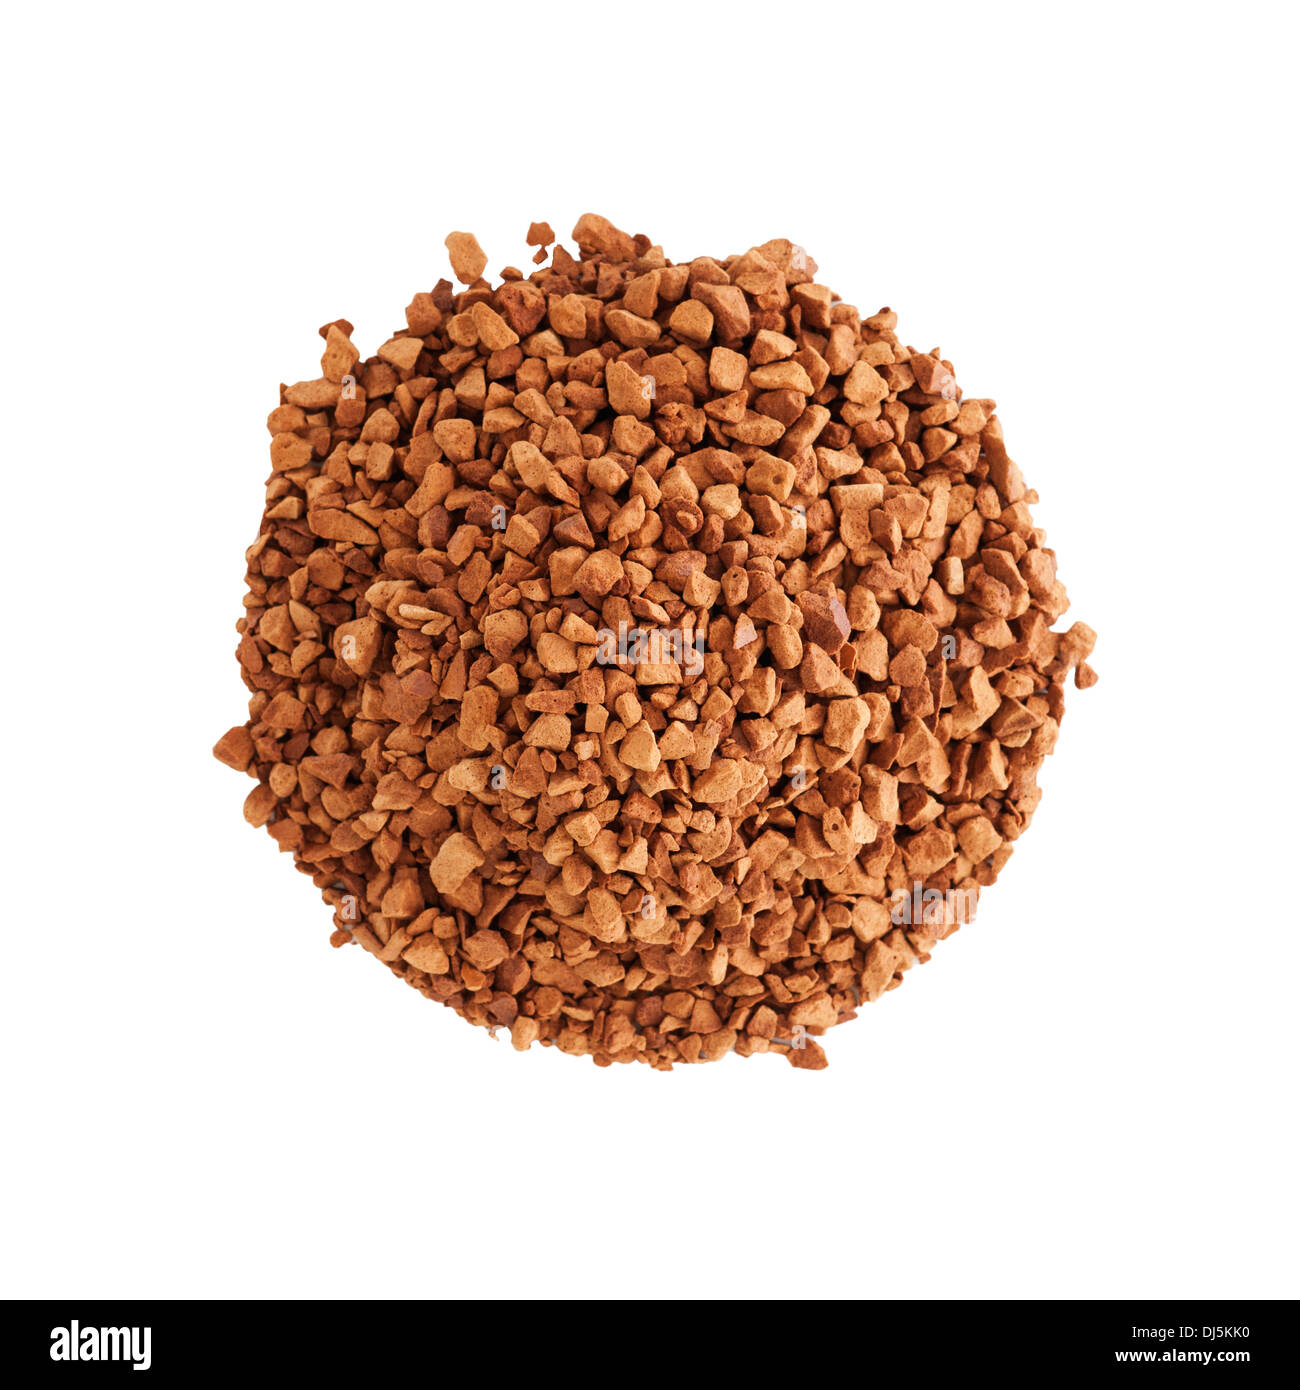 Instant coffee granules on a white background Stock Photo